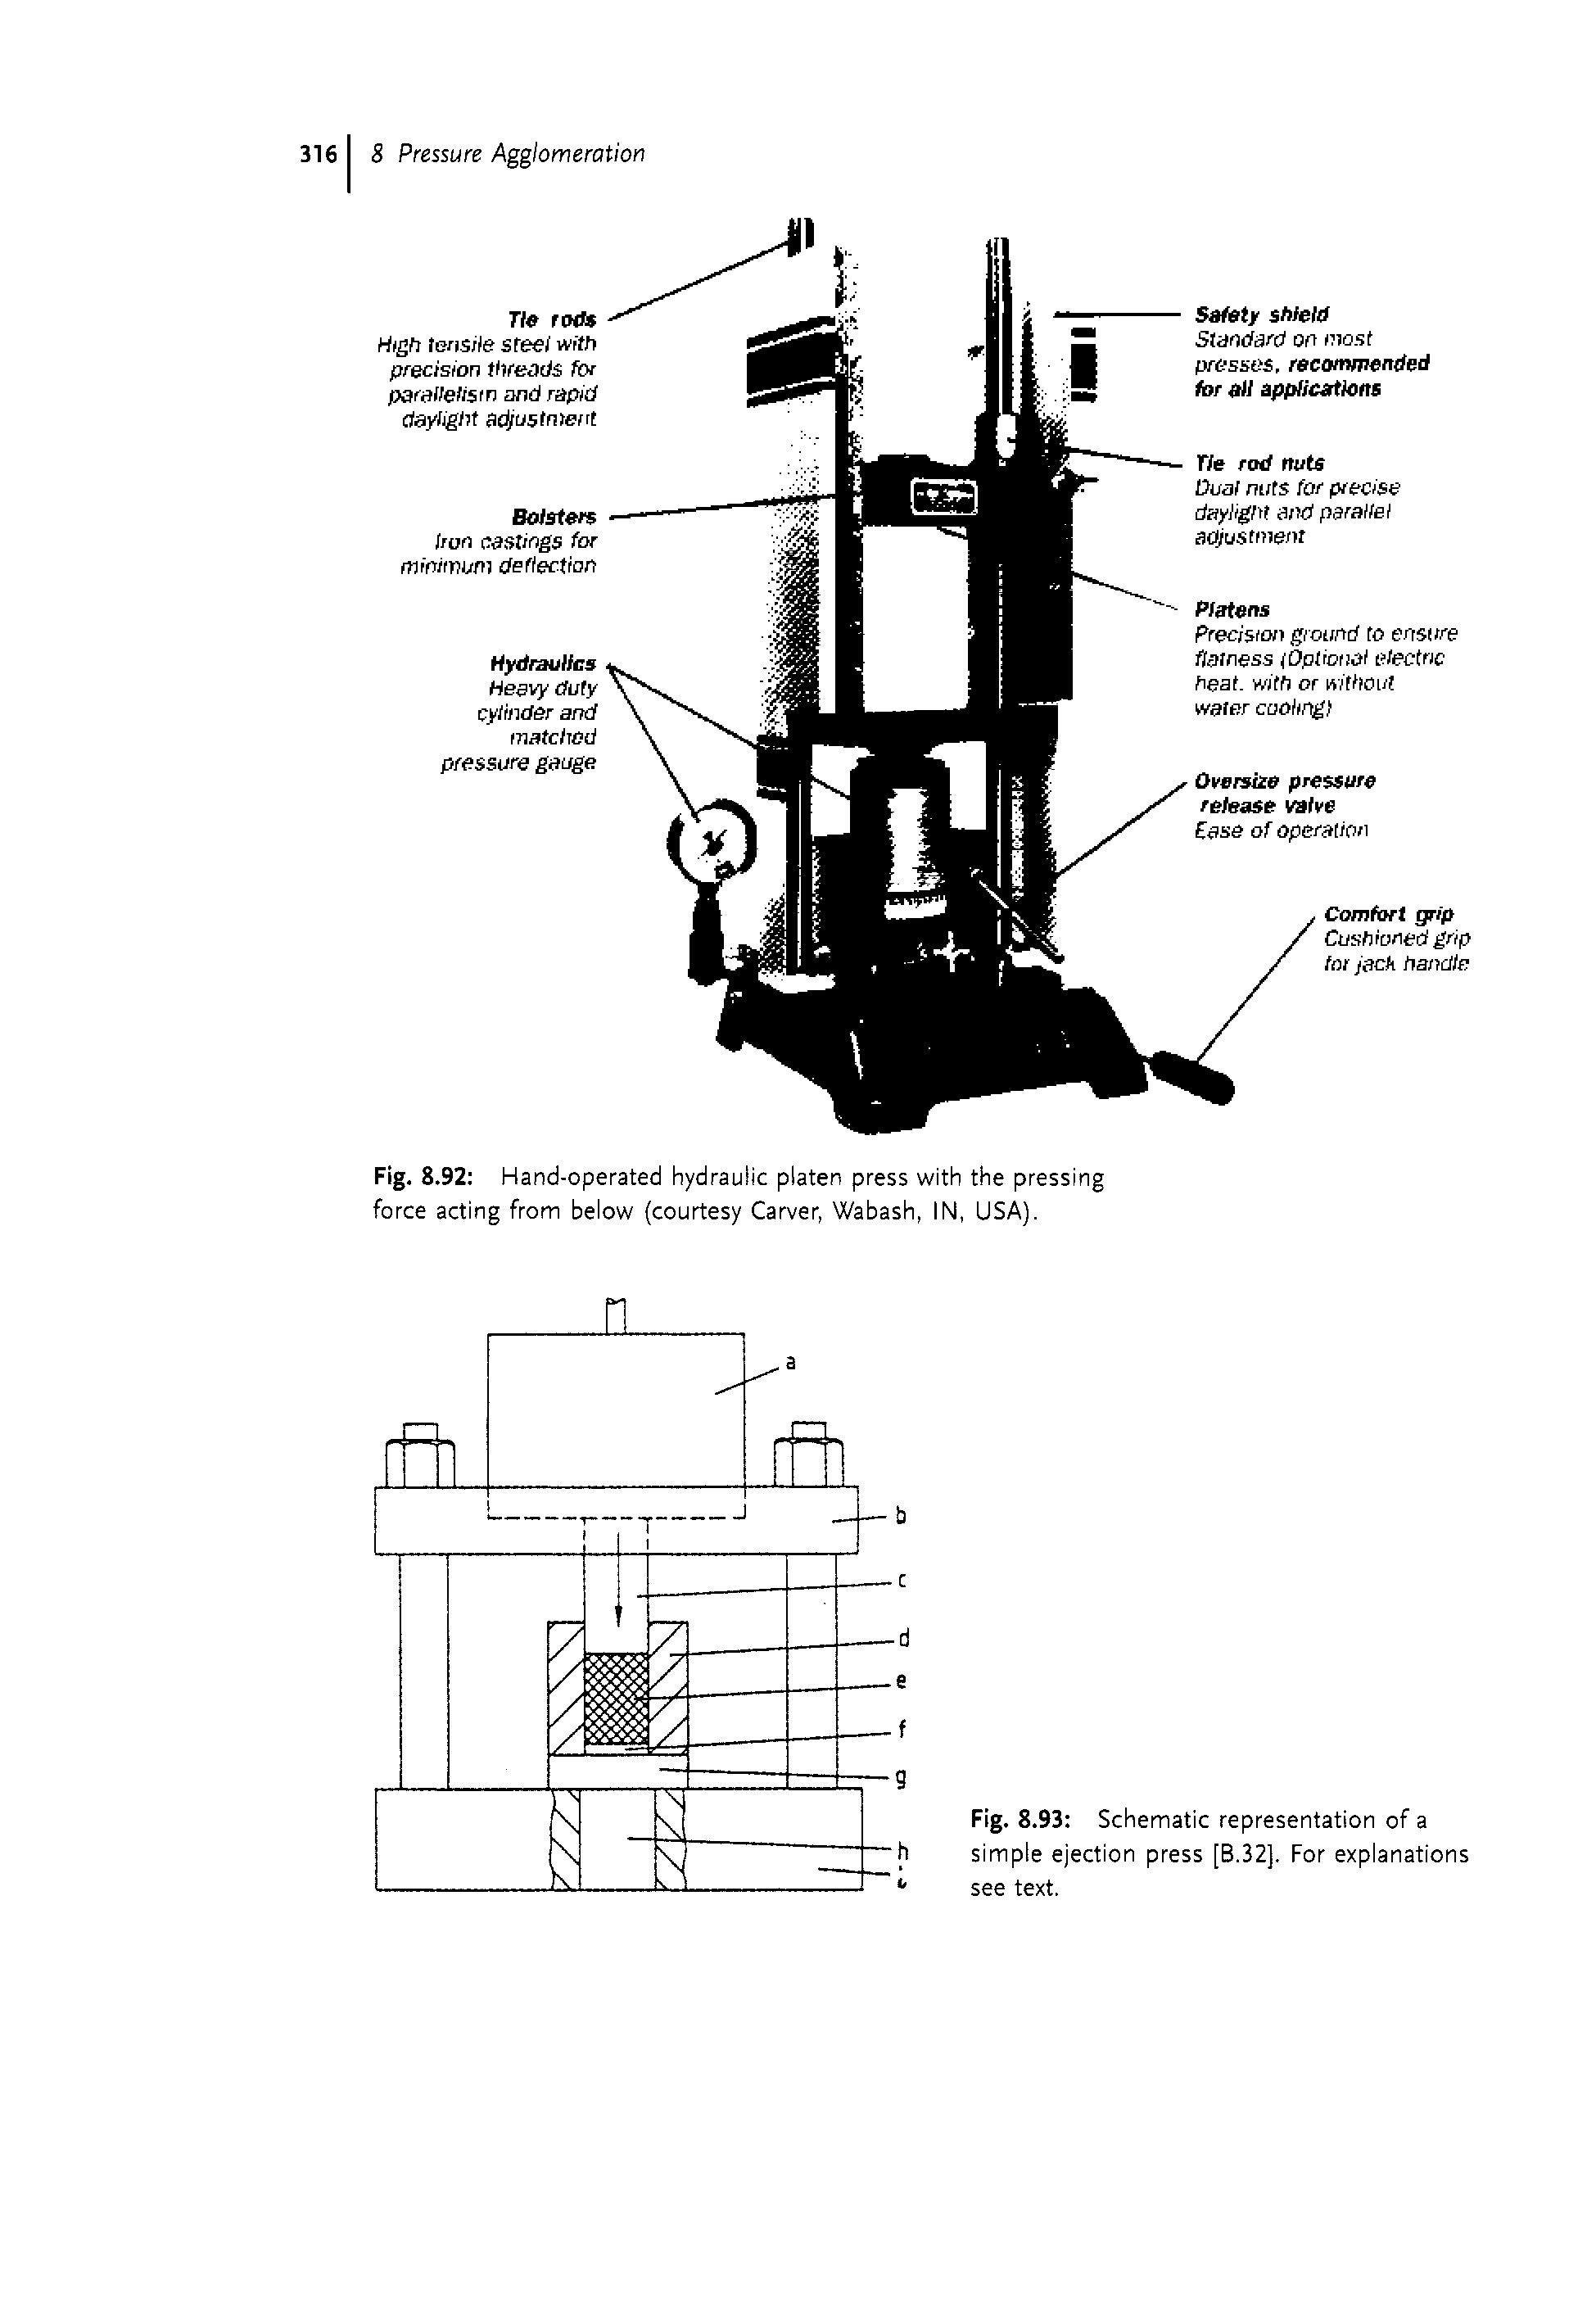 Fig. 8.92 Hand-operated hydraulic platen press with the pressing force acting from below (courtesy Carver, Wabash, IN, USA).